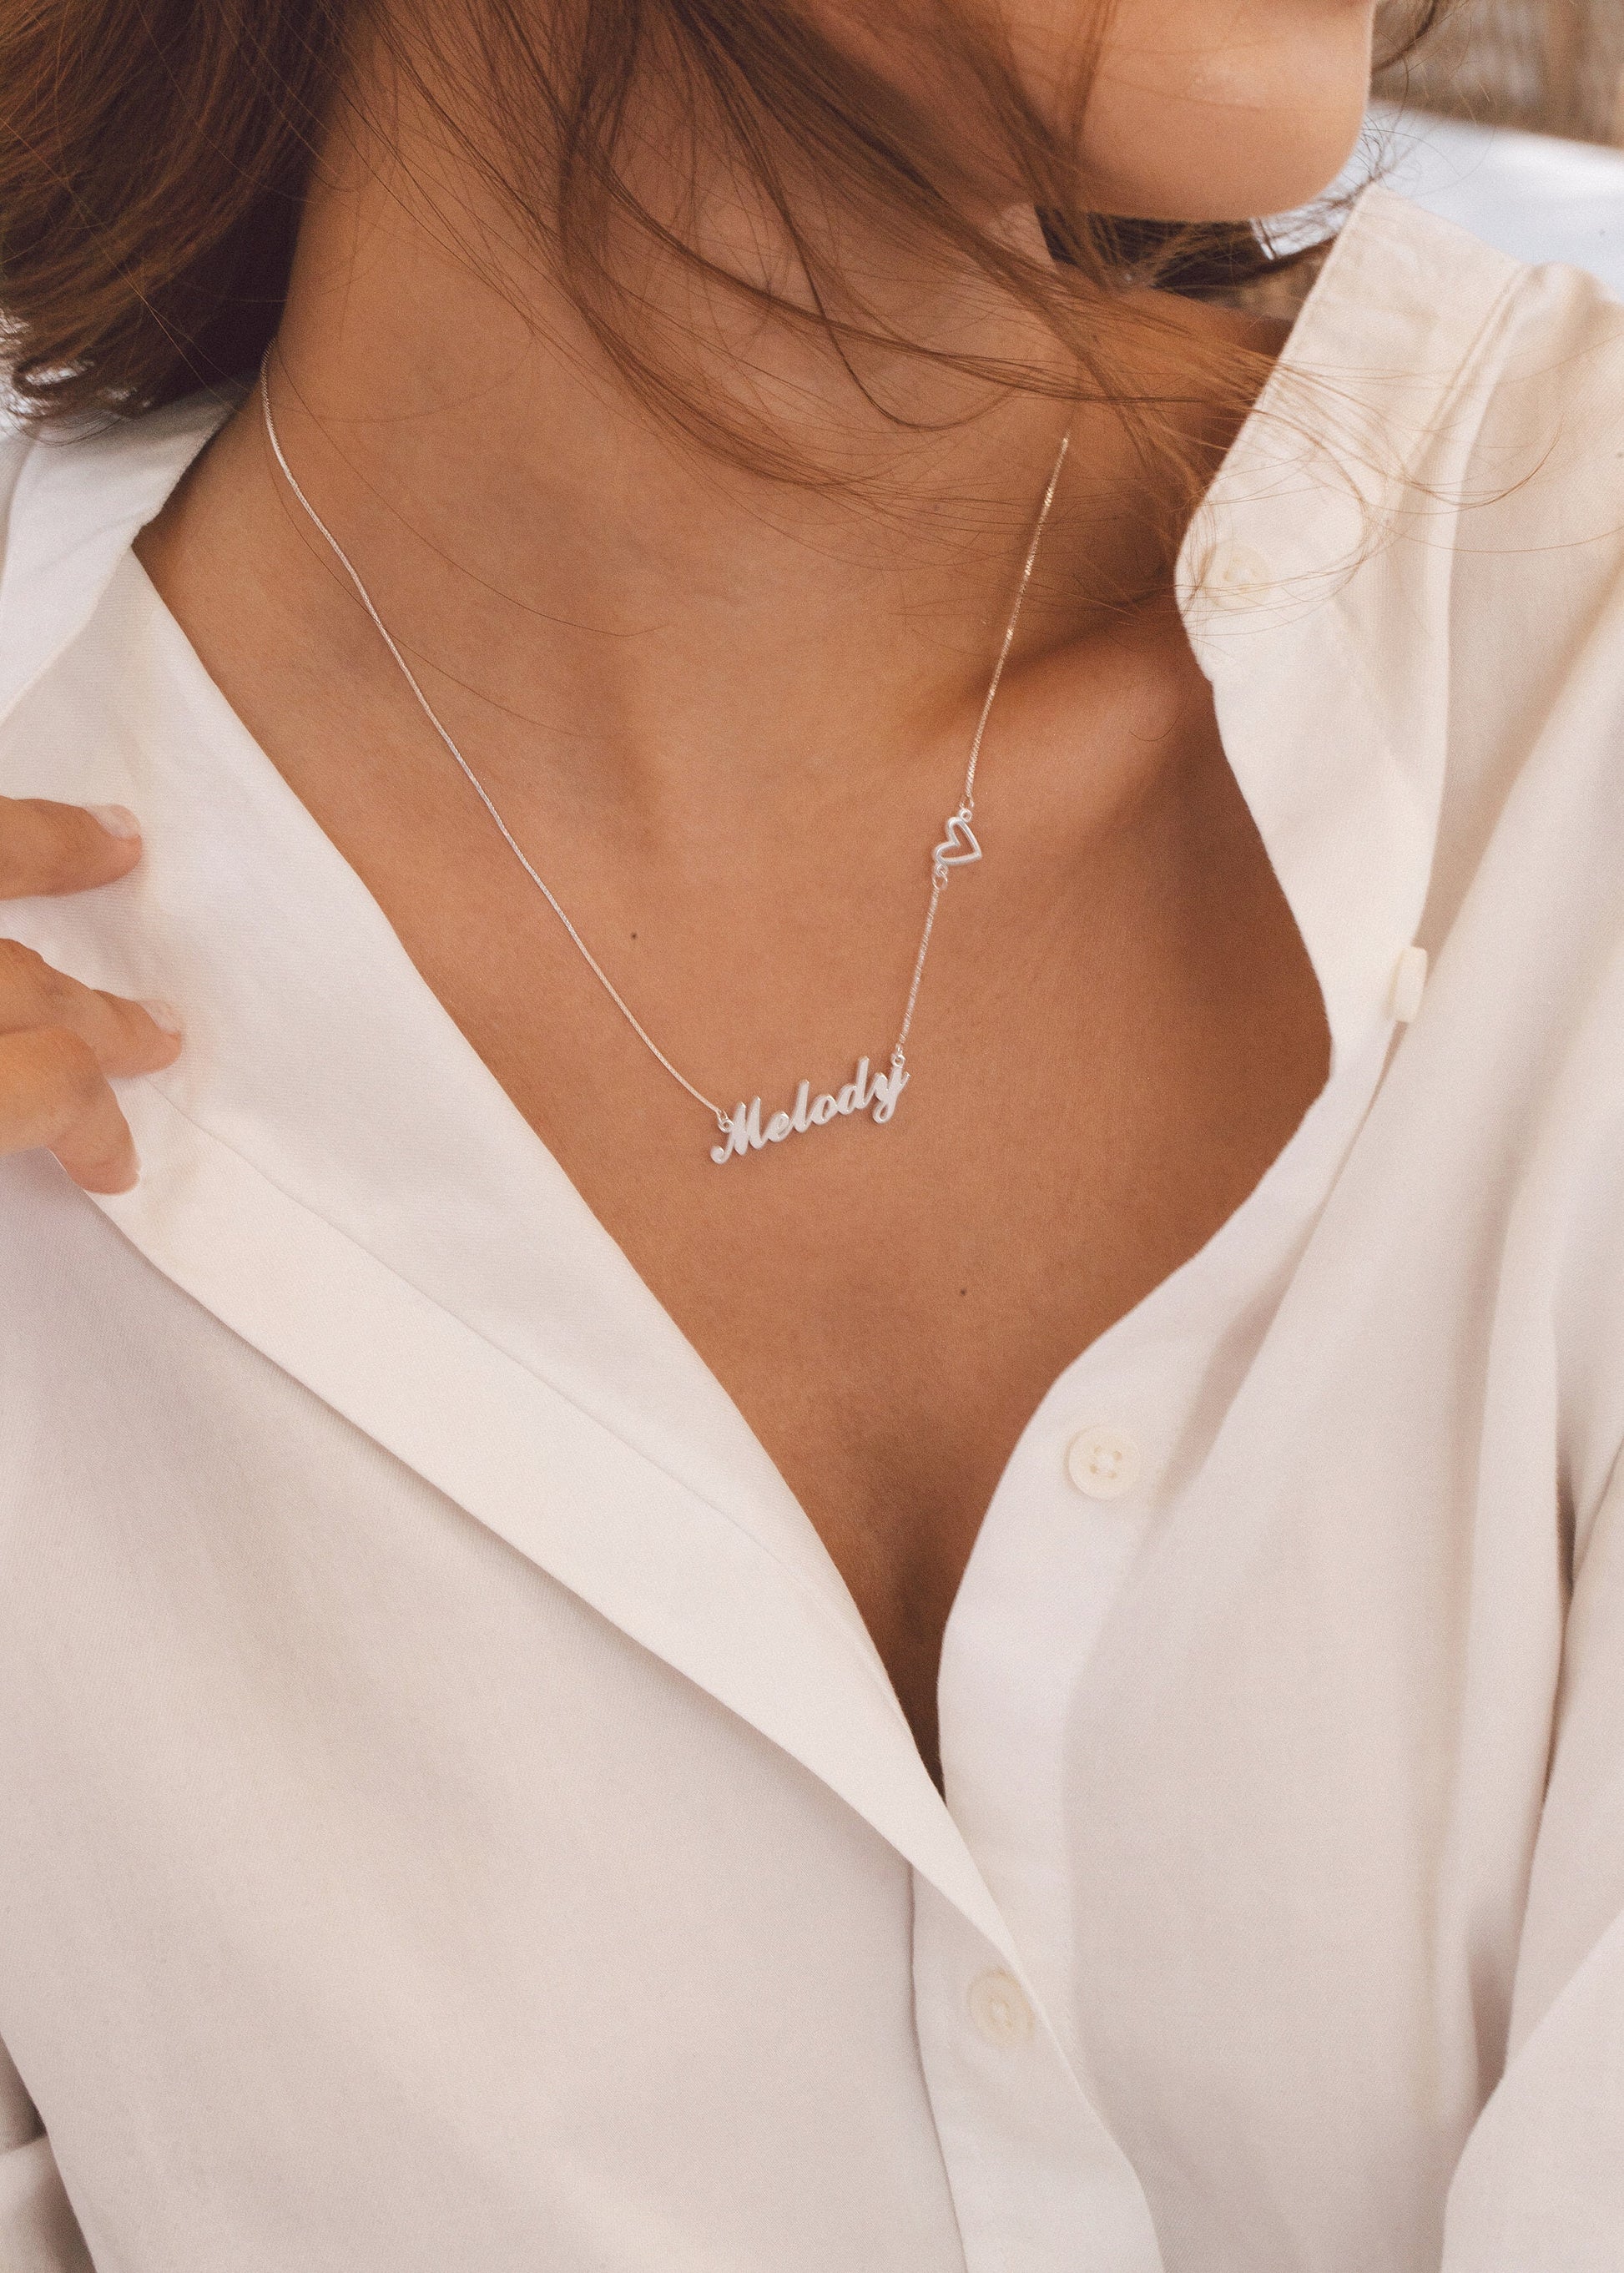 Mother's Day Gift | Custom Name Necklace| Minimal Script Name | Personalized Name Necklace | Personalized Gift | Bridesmaid Gift | Mom Gift